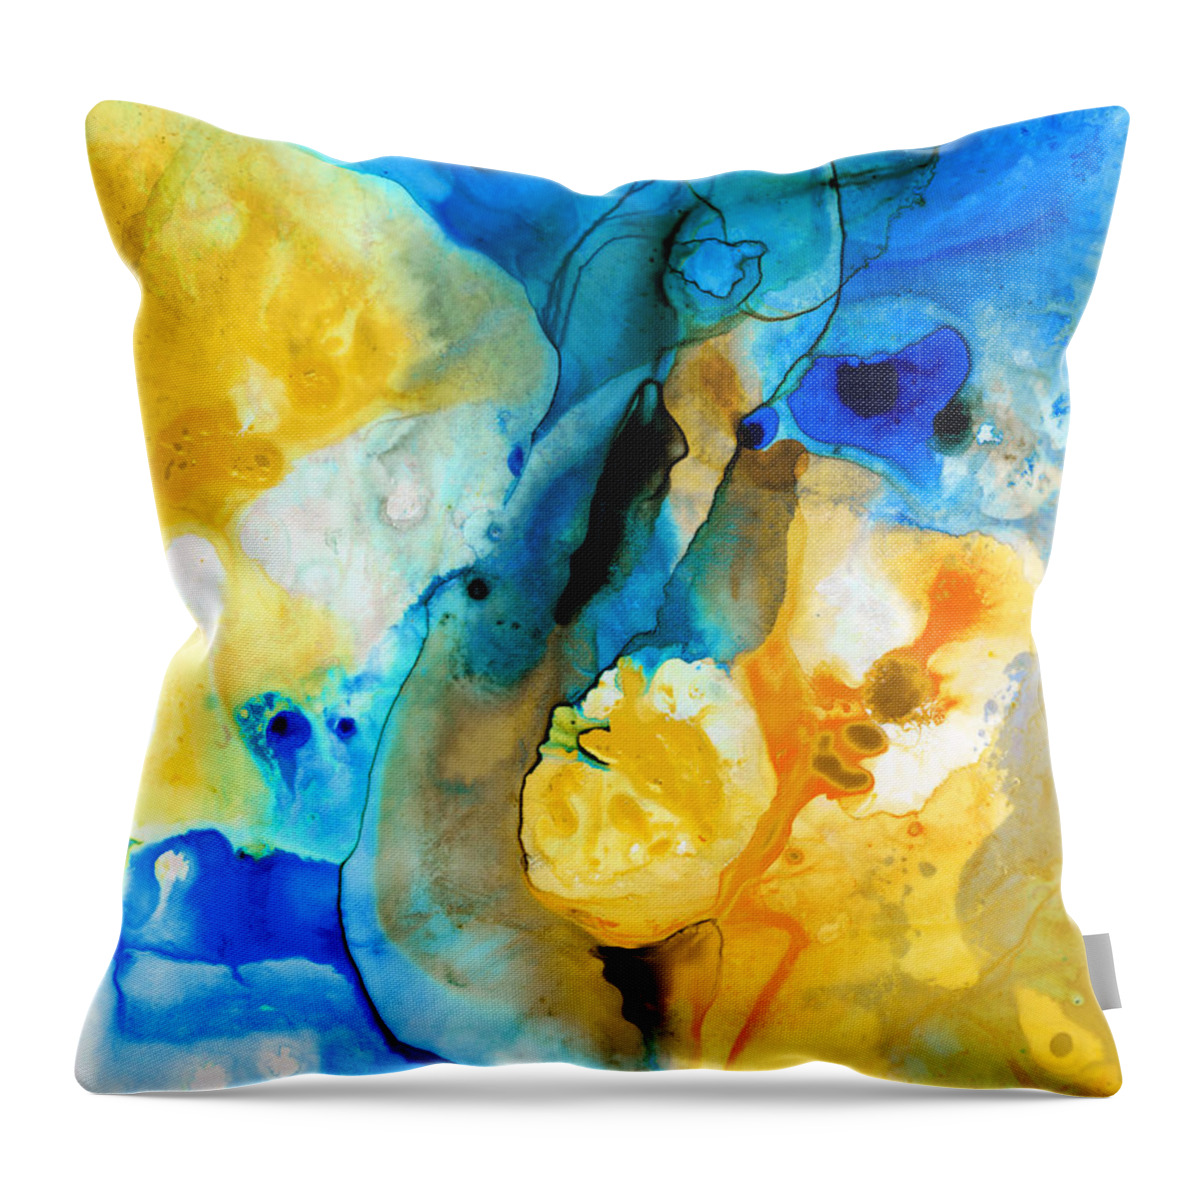 Abstract Throw Pillow featuring the painting Iced Lemon Drop - Abstract Art By Sharon Cummings by Sharon Cummings